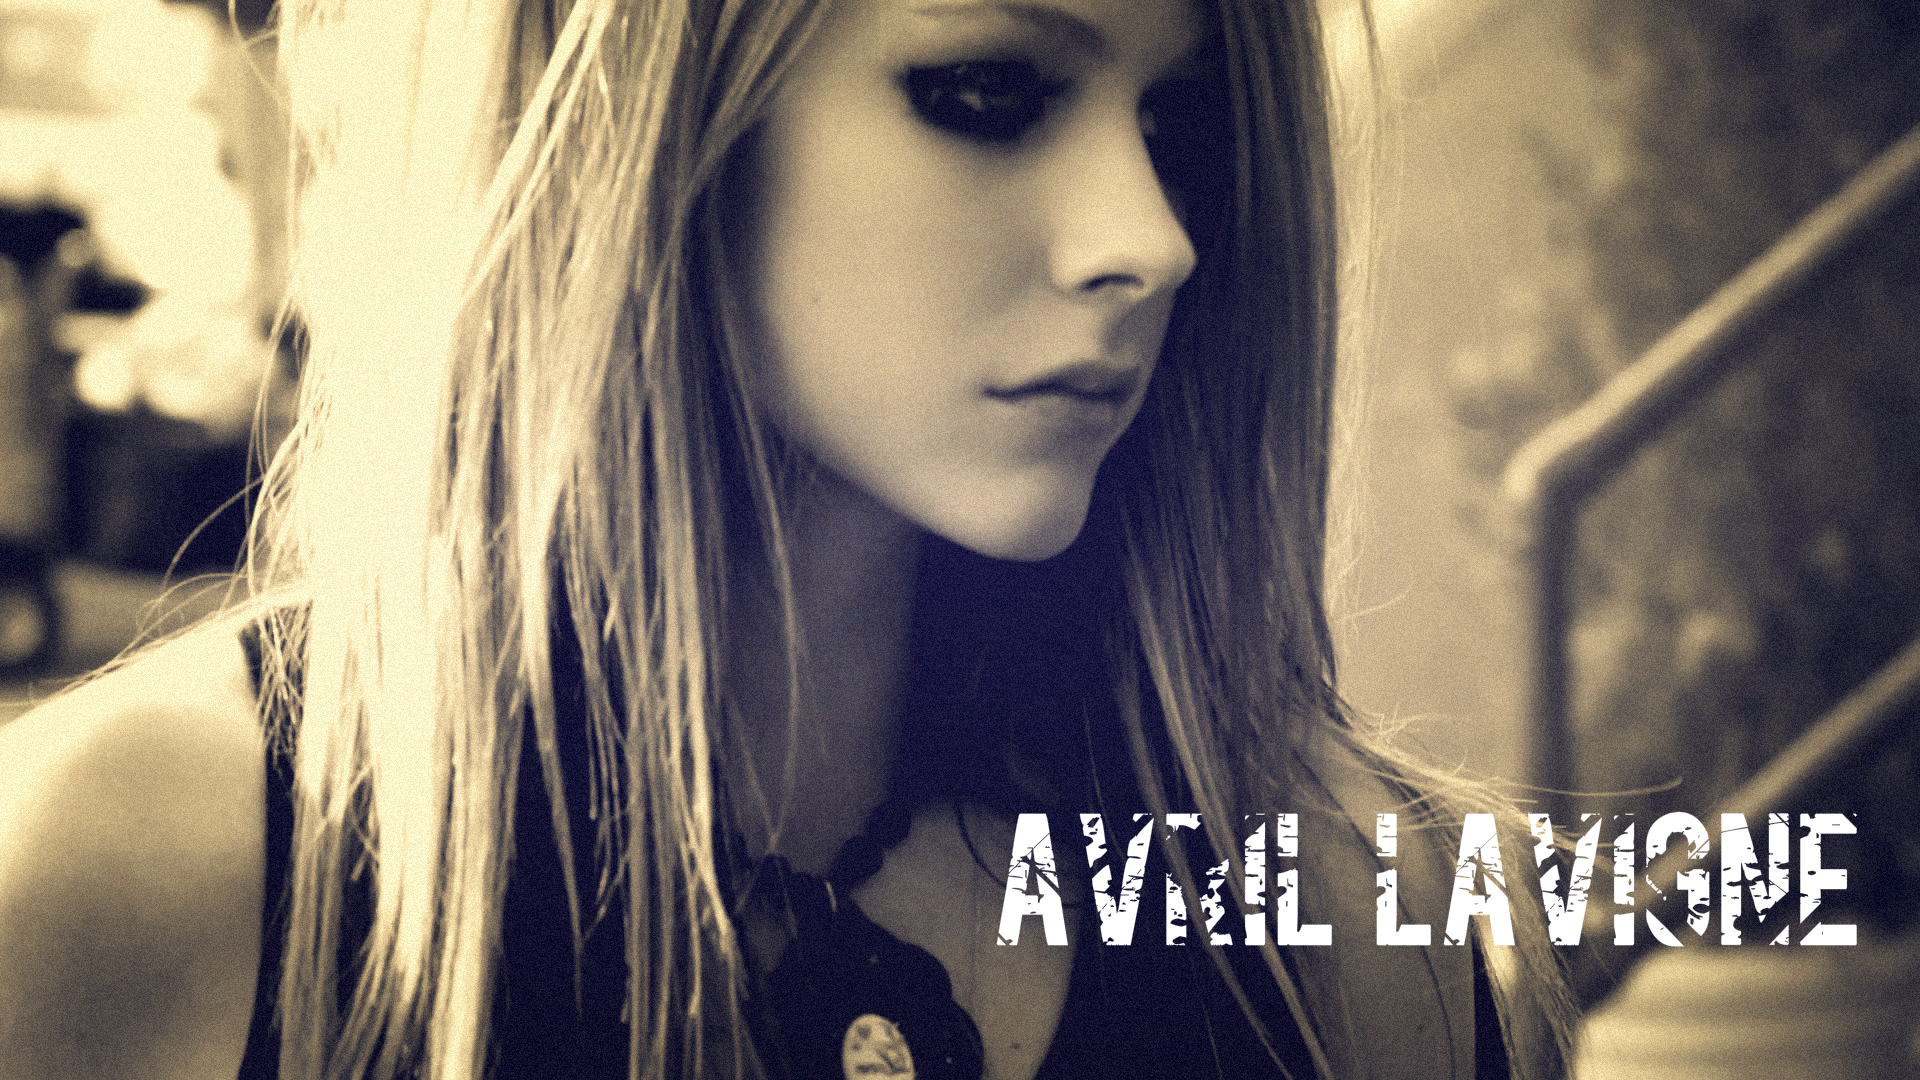 Free Download Avril Lavigne Wallpaper Hd 19x1080 For Your Desktop Mobile Tablet Explore 75 Wallpaper Of Avril Wallpaper Of Animals Wallpapers Of Cute Love Wallpaper Of The Week